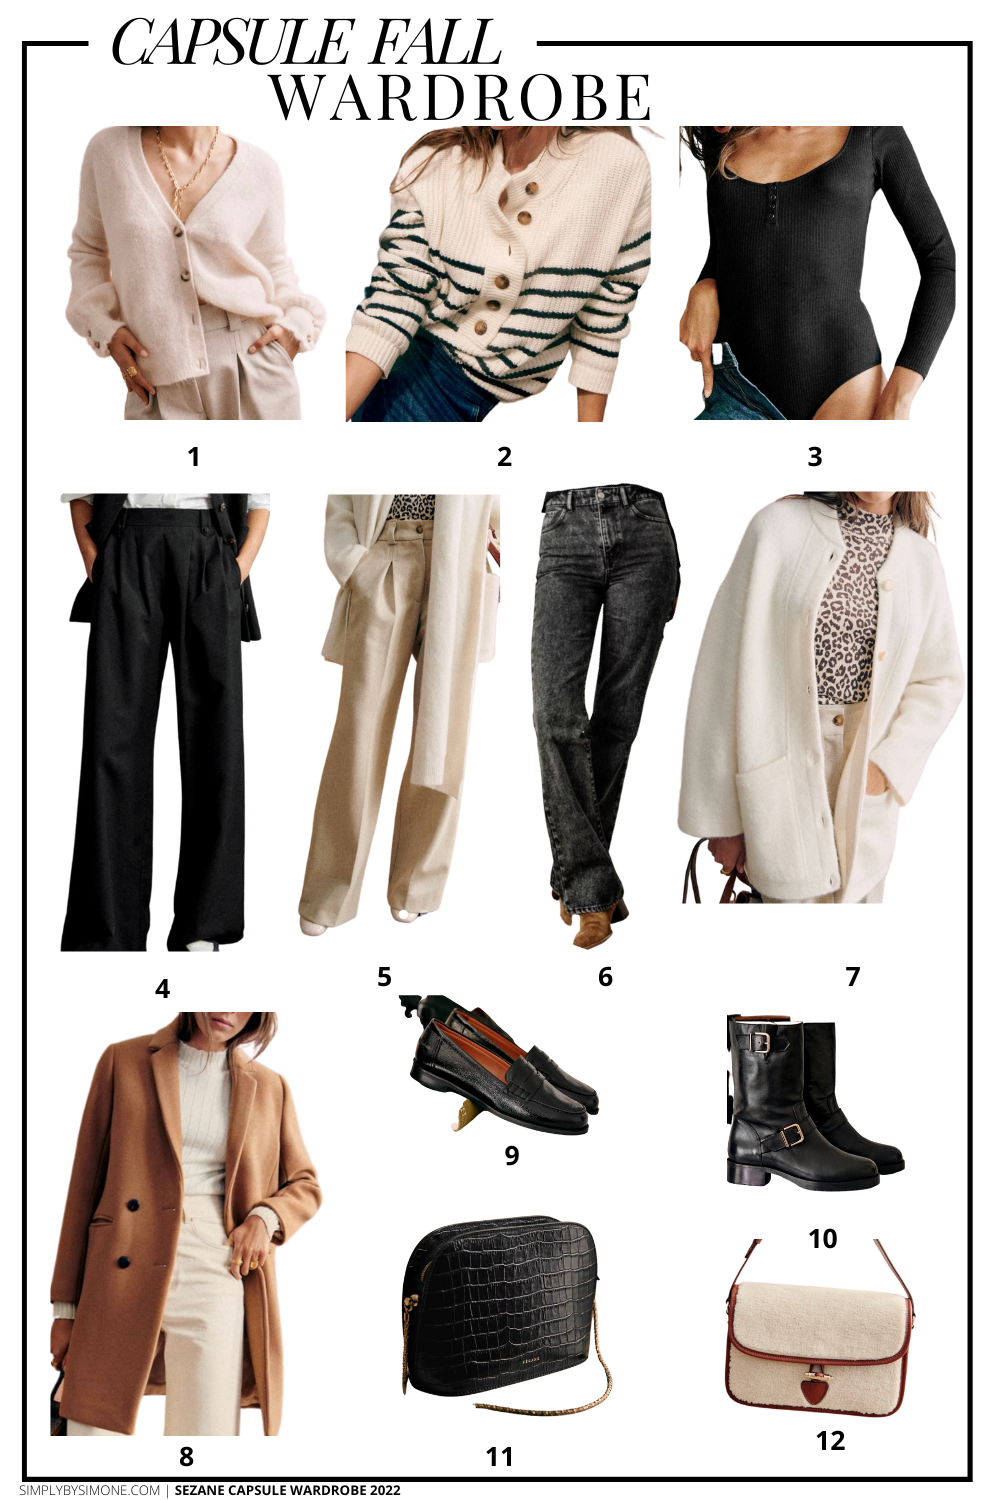 12 CAPSULE WARDROBE ACCESSORIES TO SHOP FOR FALL + WINTER